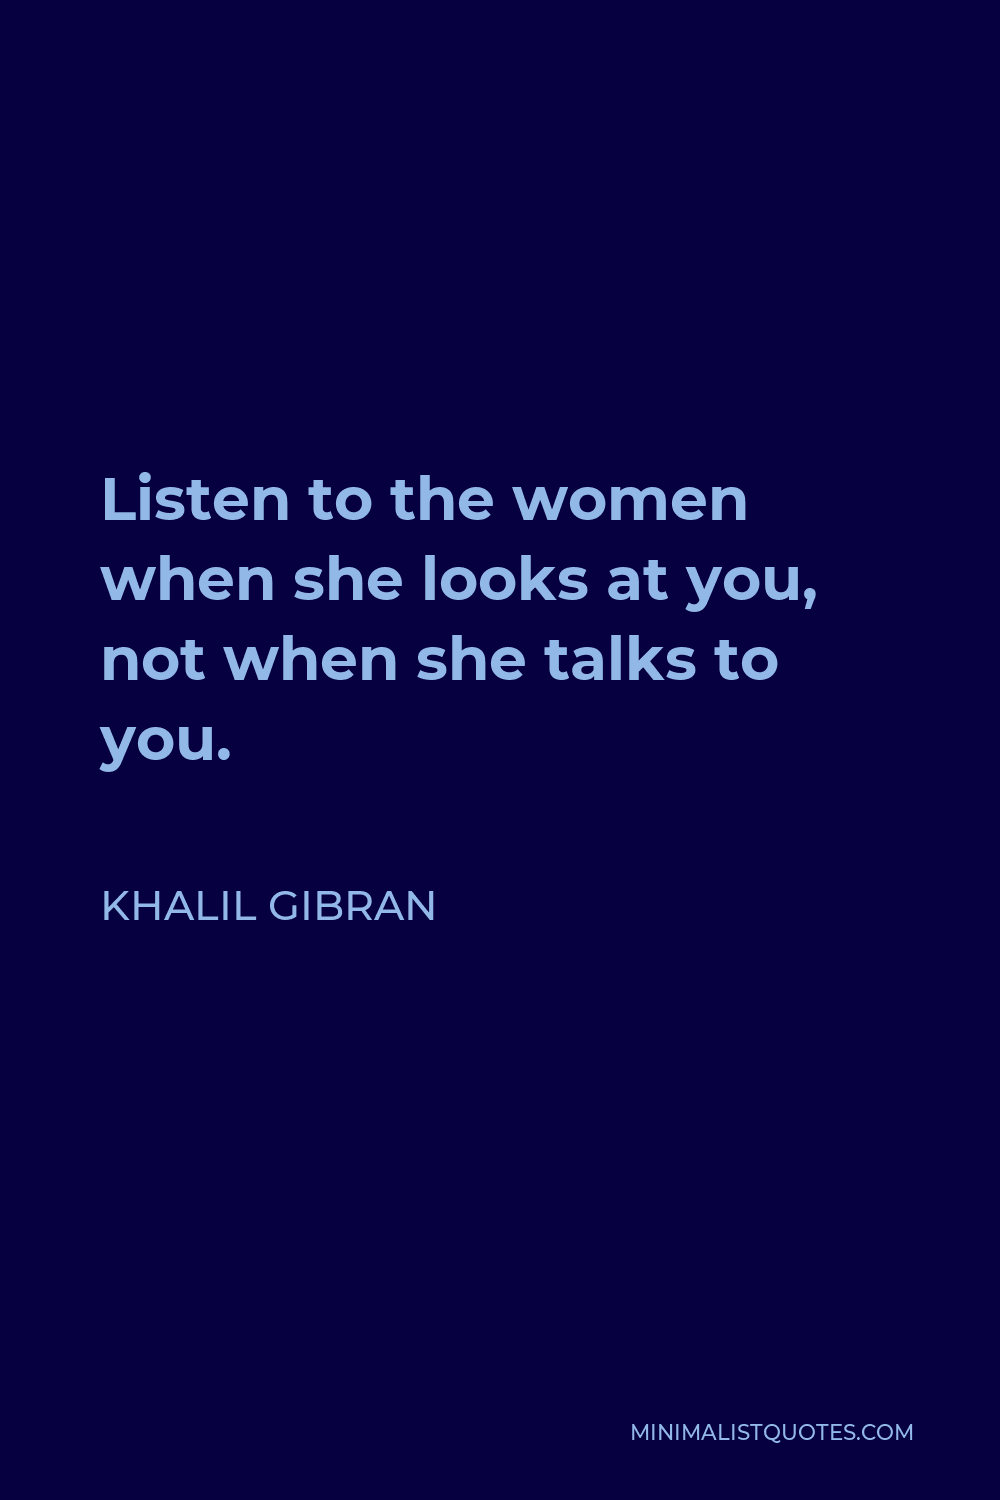 Khalil Gibran Quote - Listen to the women when she looks at you, not when she talks to you.